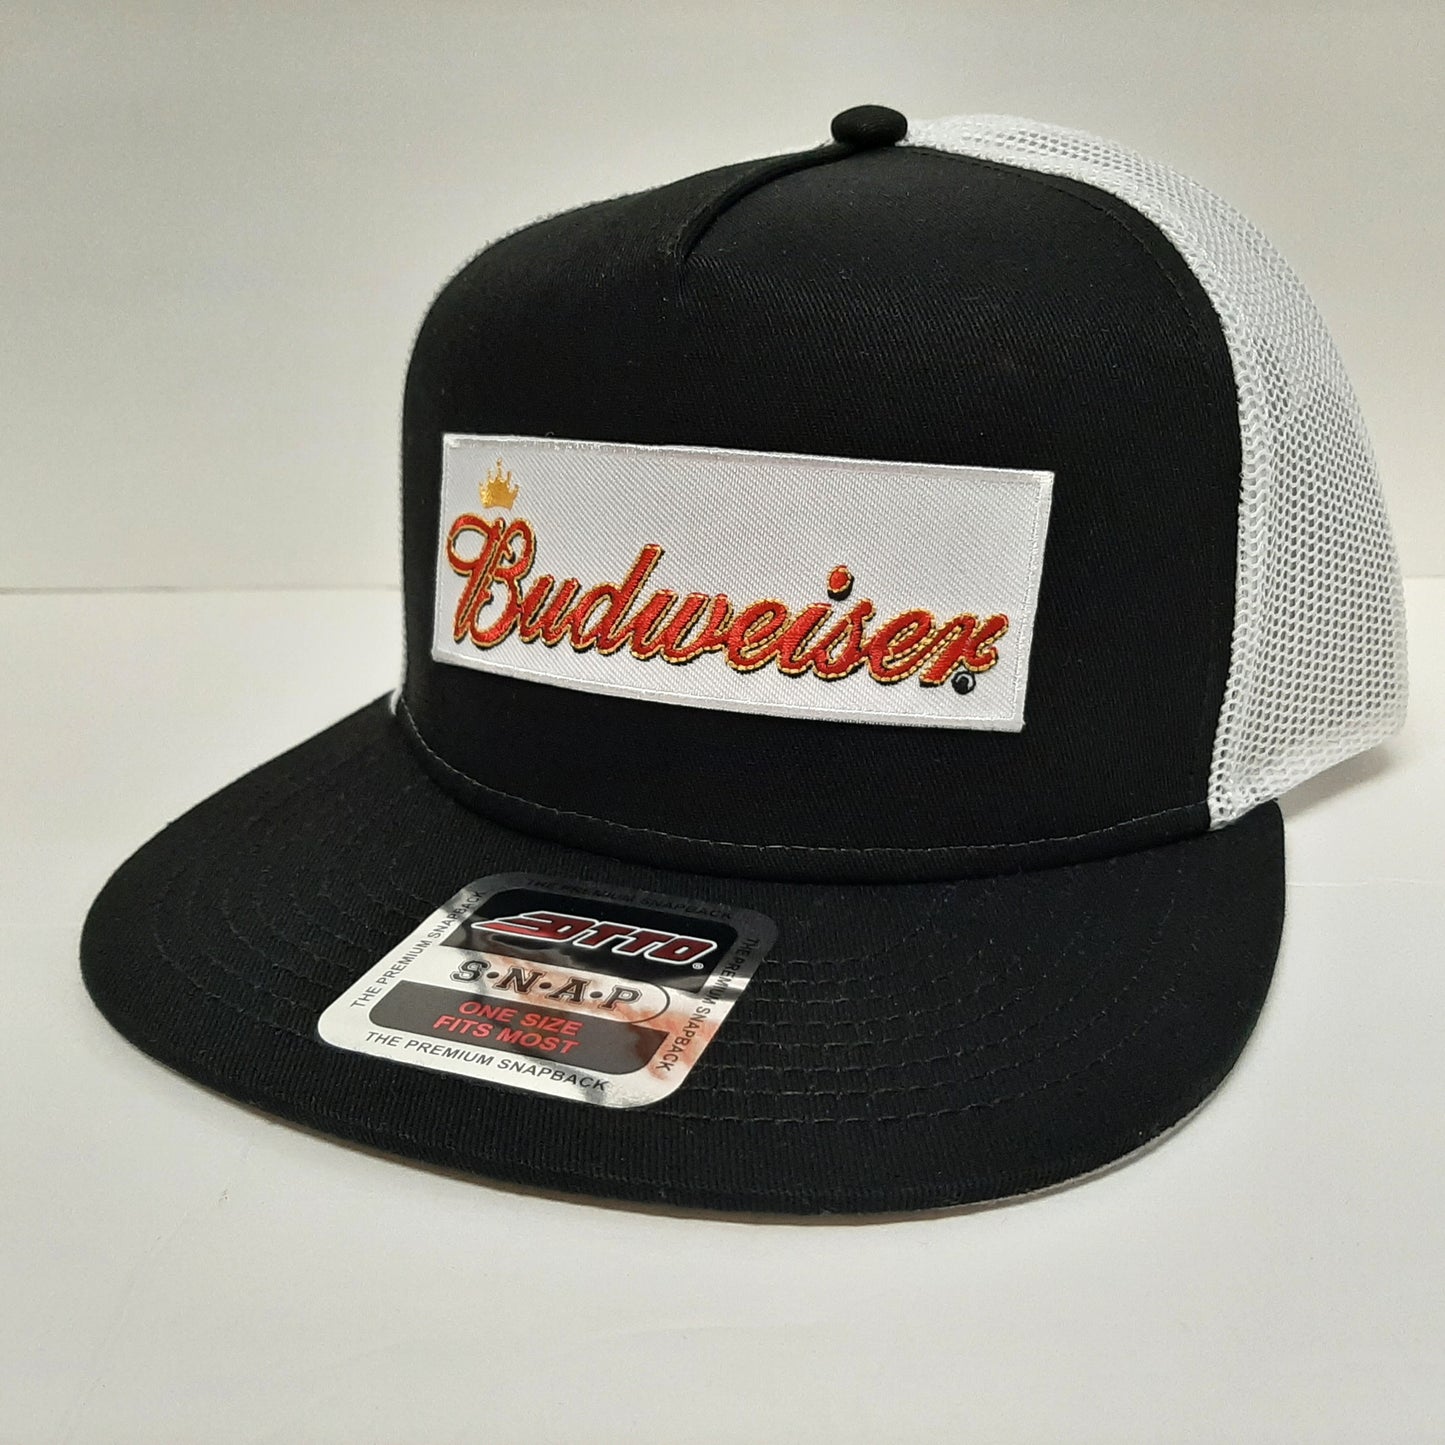 Budweiser Beer Embroidered Patch Flat Bill Snapback Mesh Hat Cap OTTO